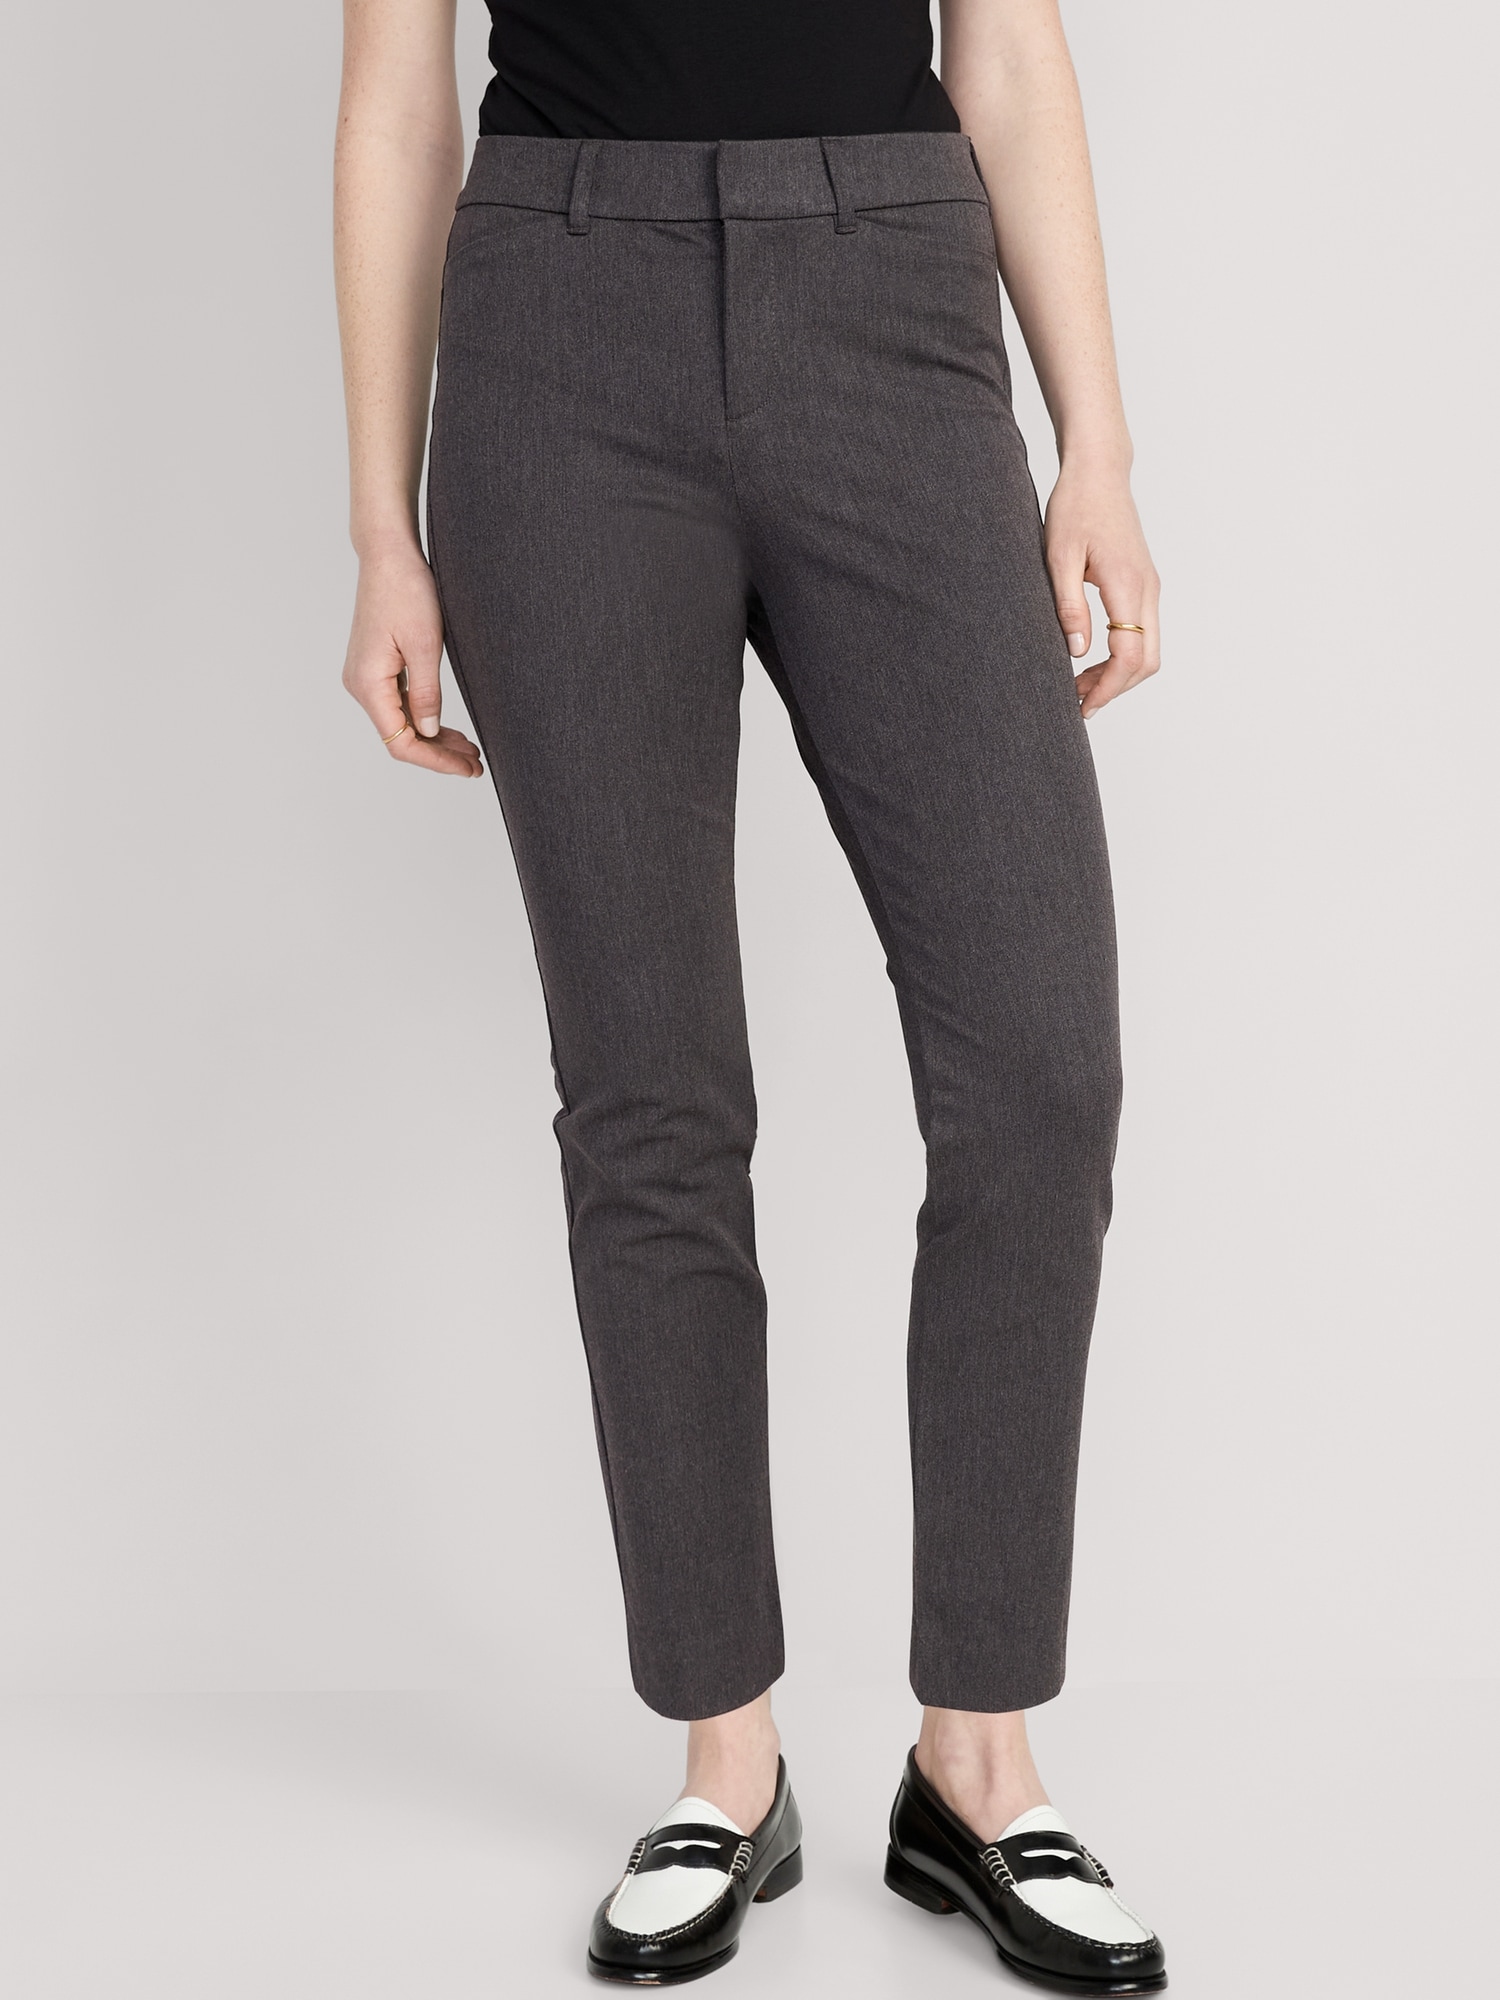 Old Navy Women's High Rise Pixie Ankle Pants